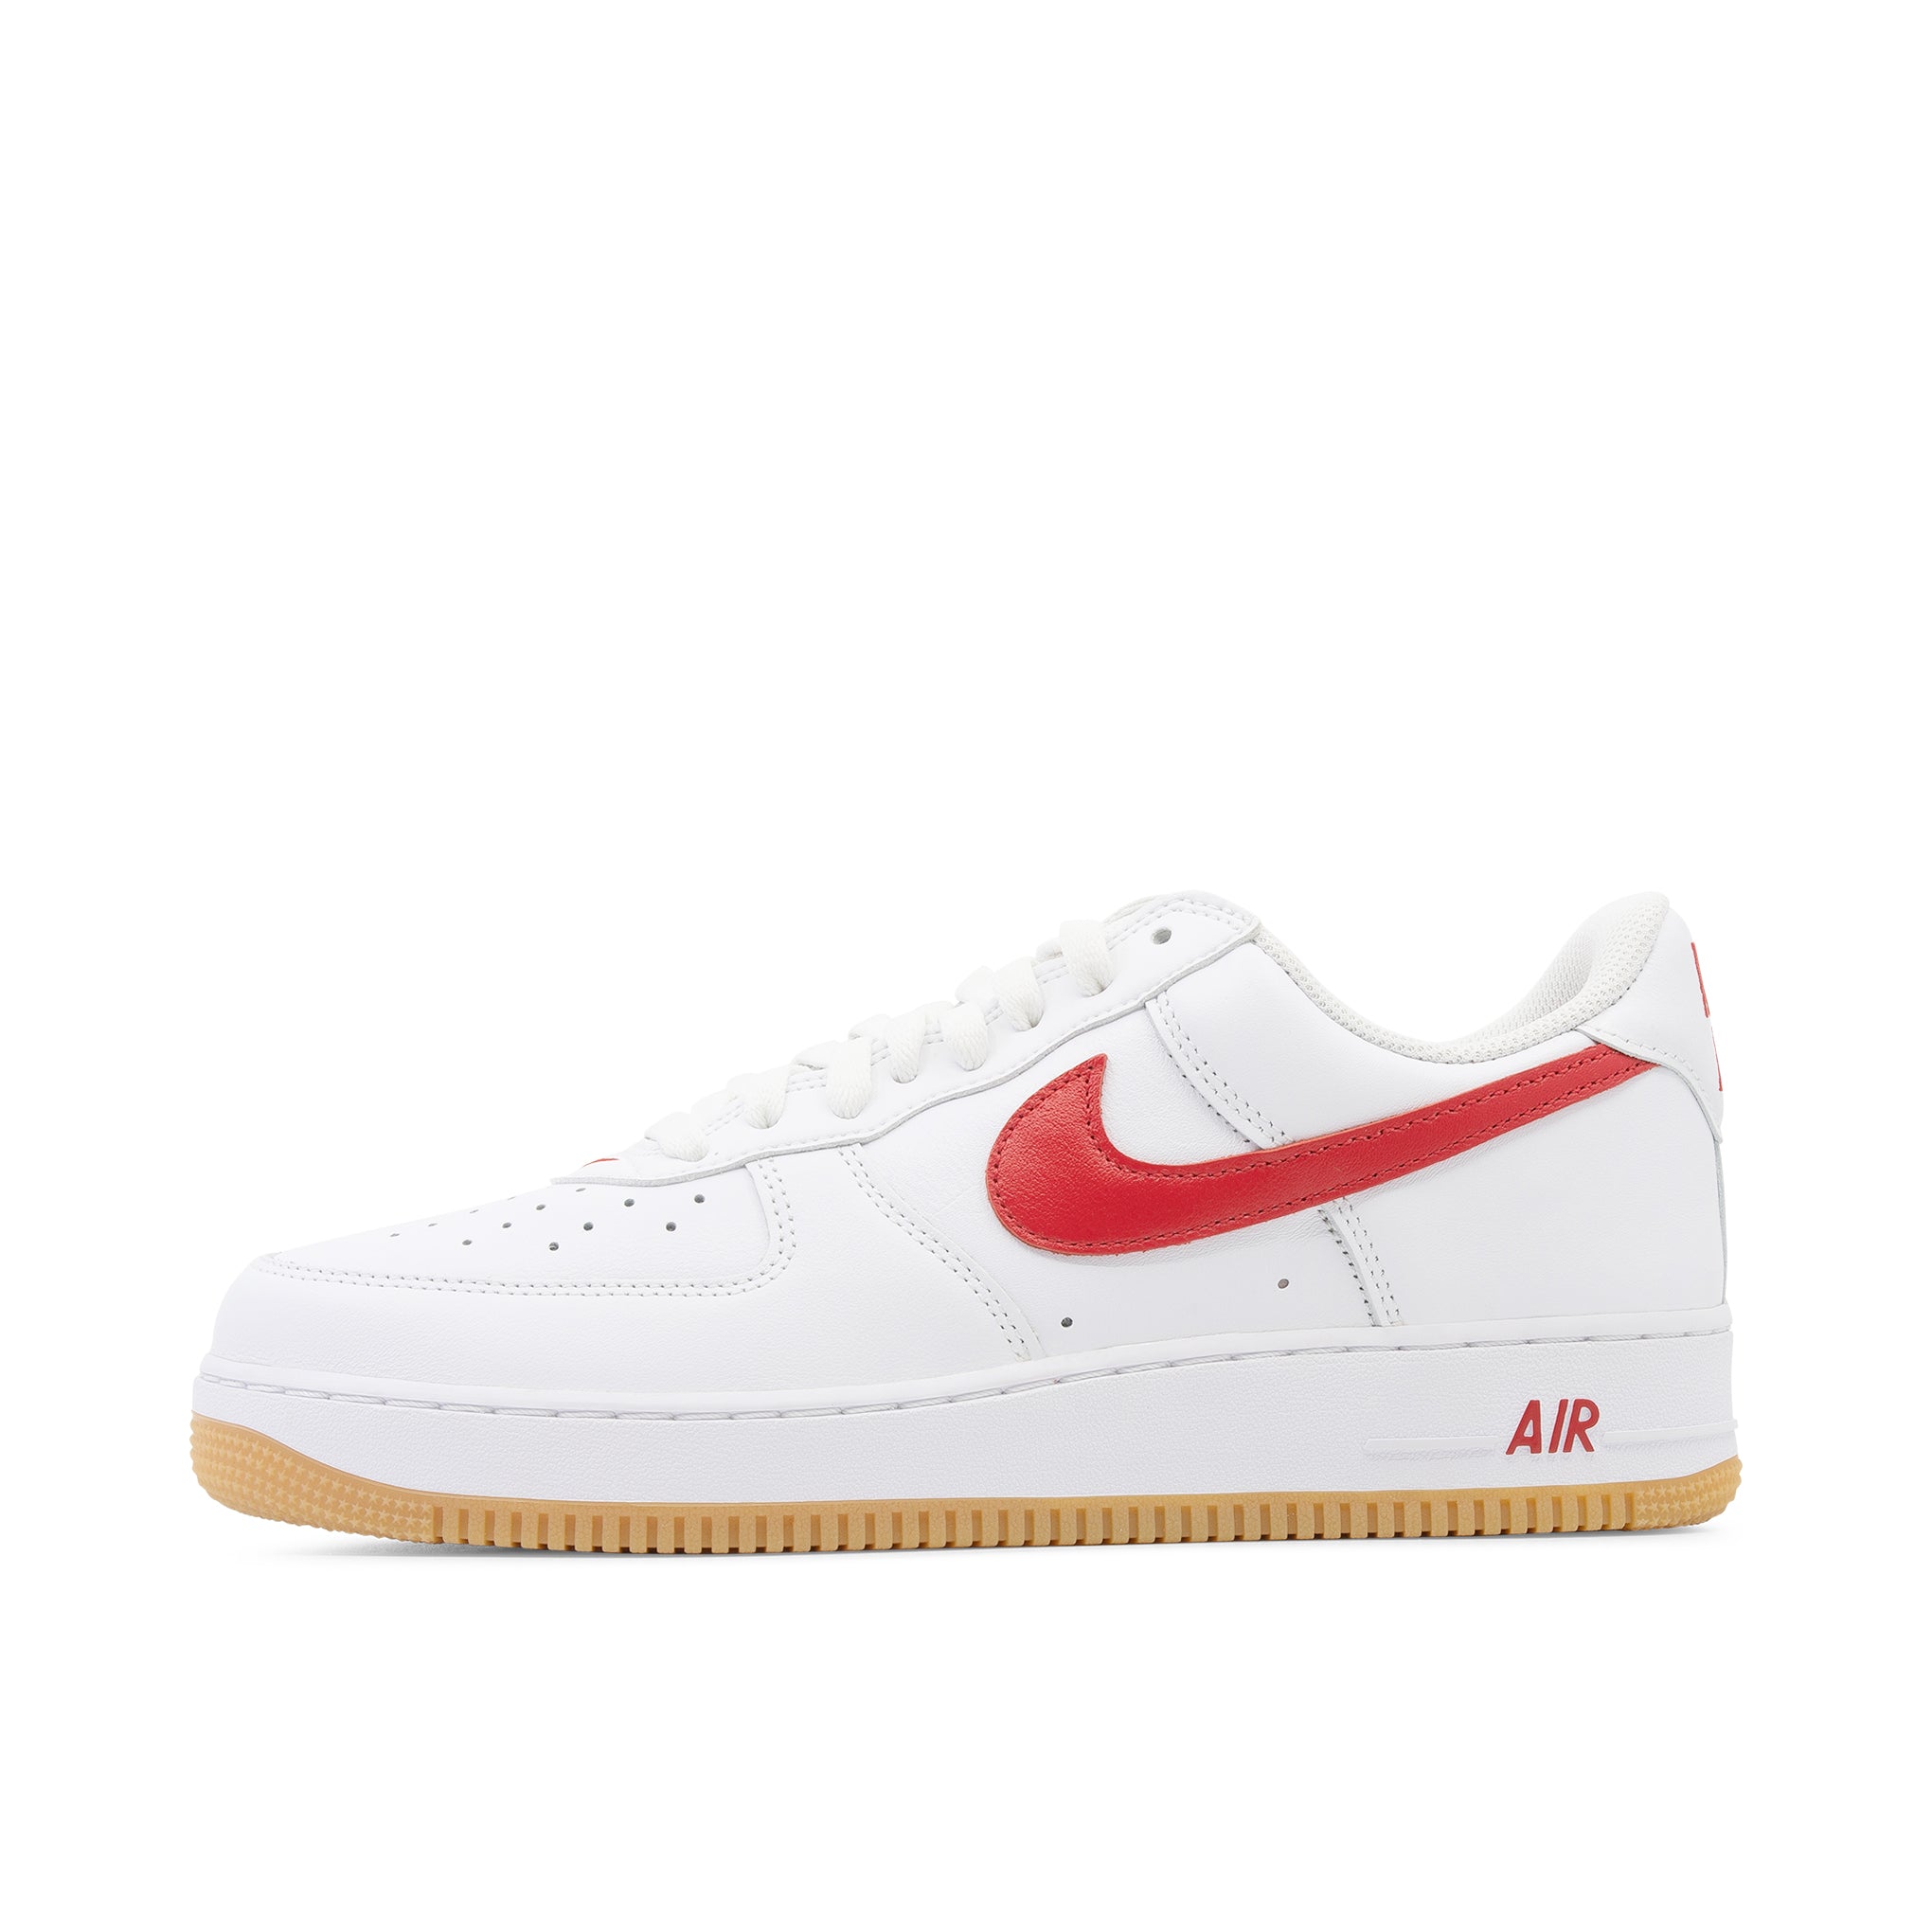 NIKE AIR FORCE 1 LOW COLOUR OF THE MONTH RED GUM